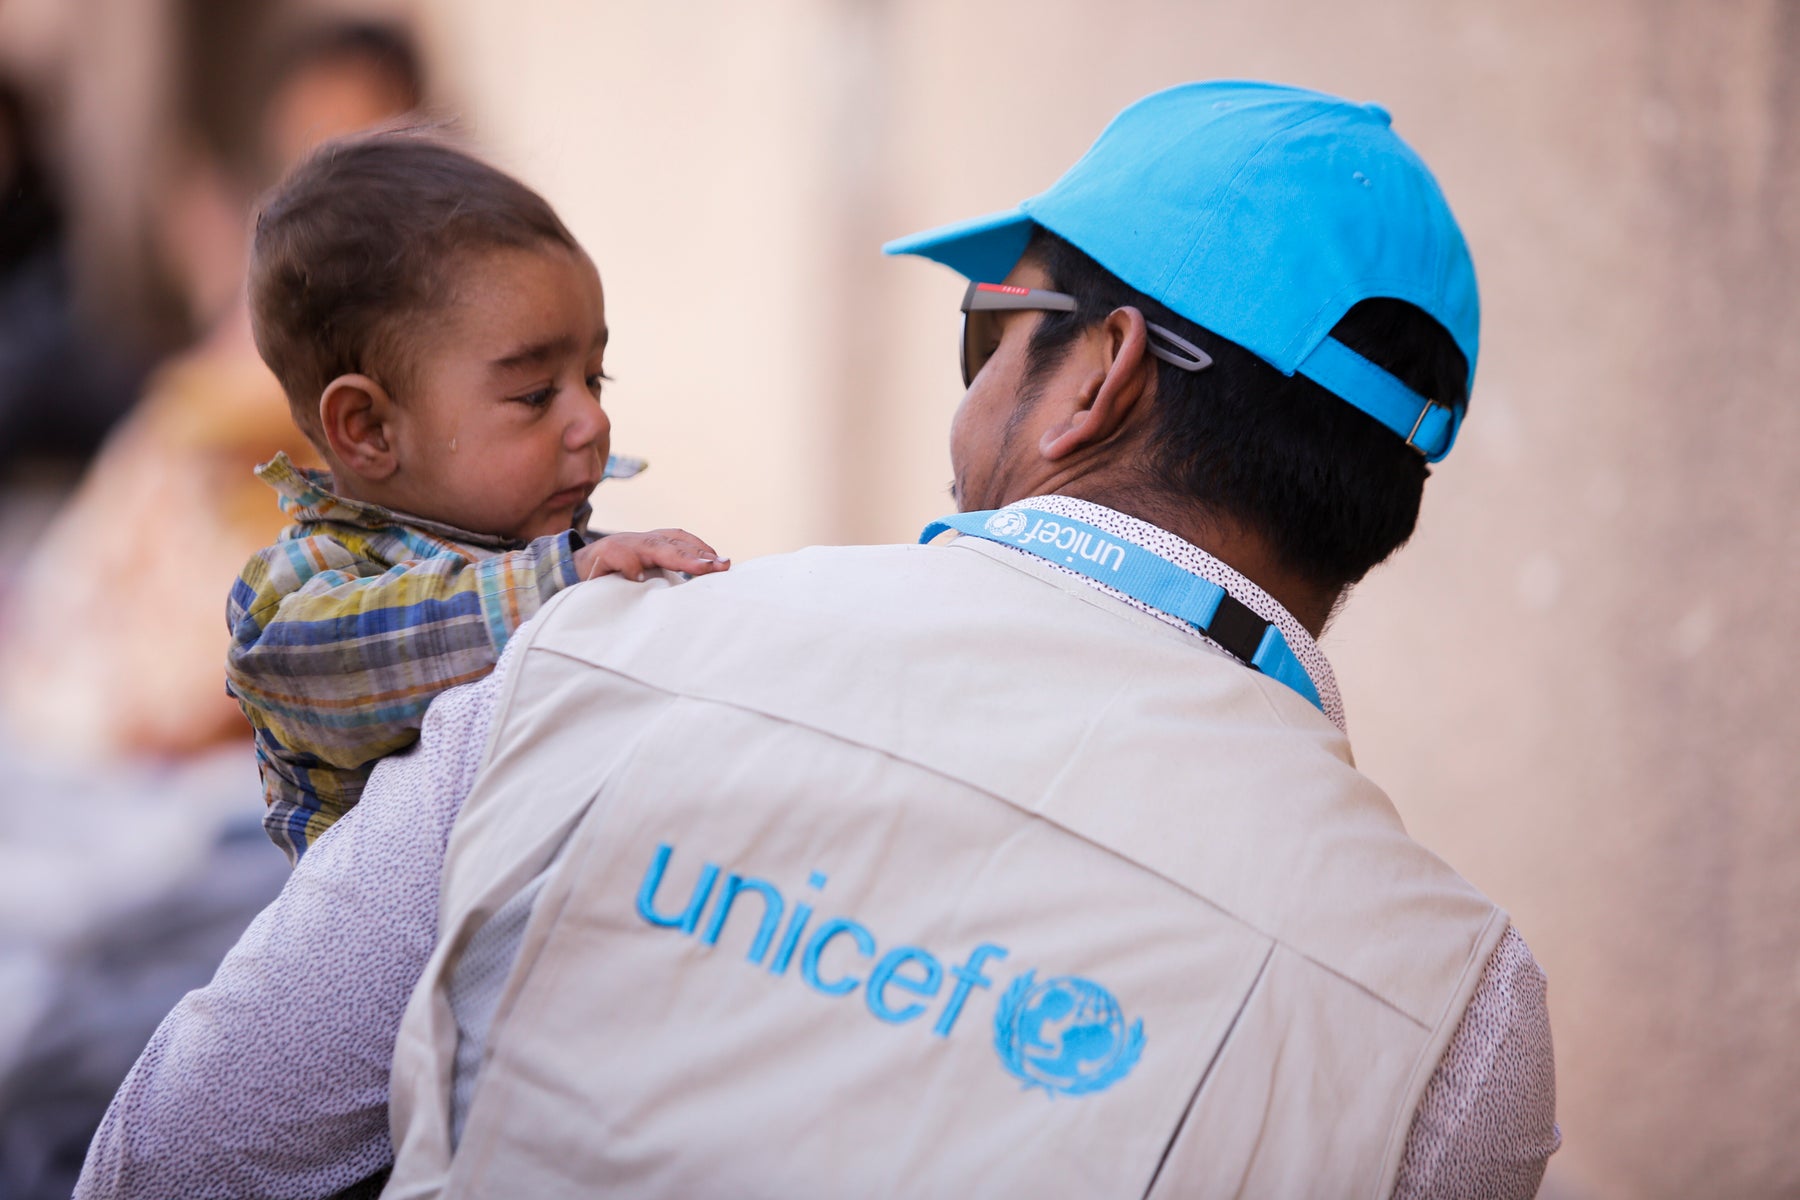 Child crying the arms of a UNICEF worker.